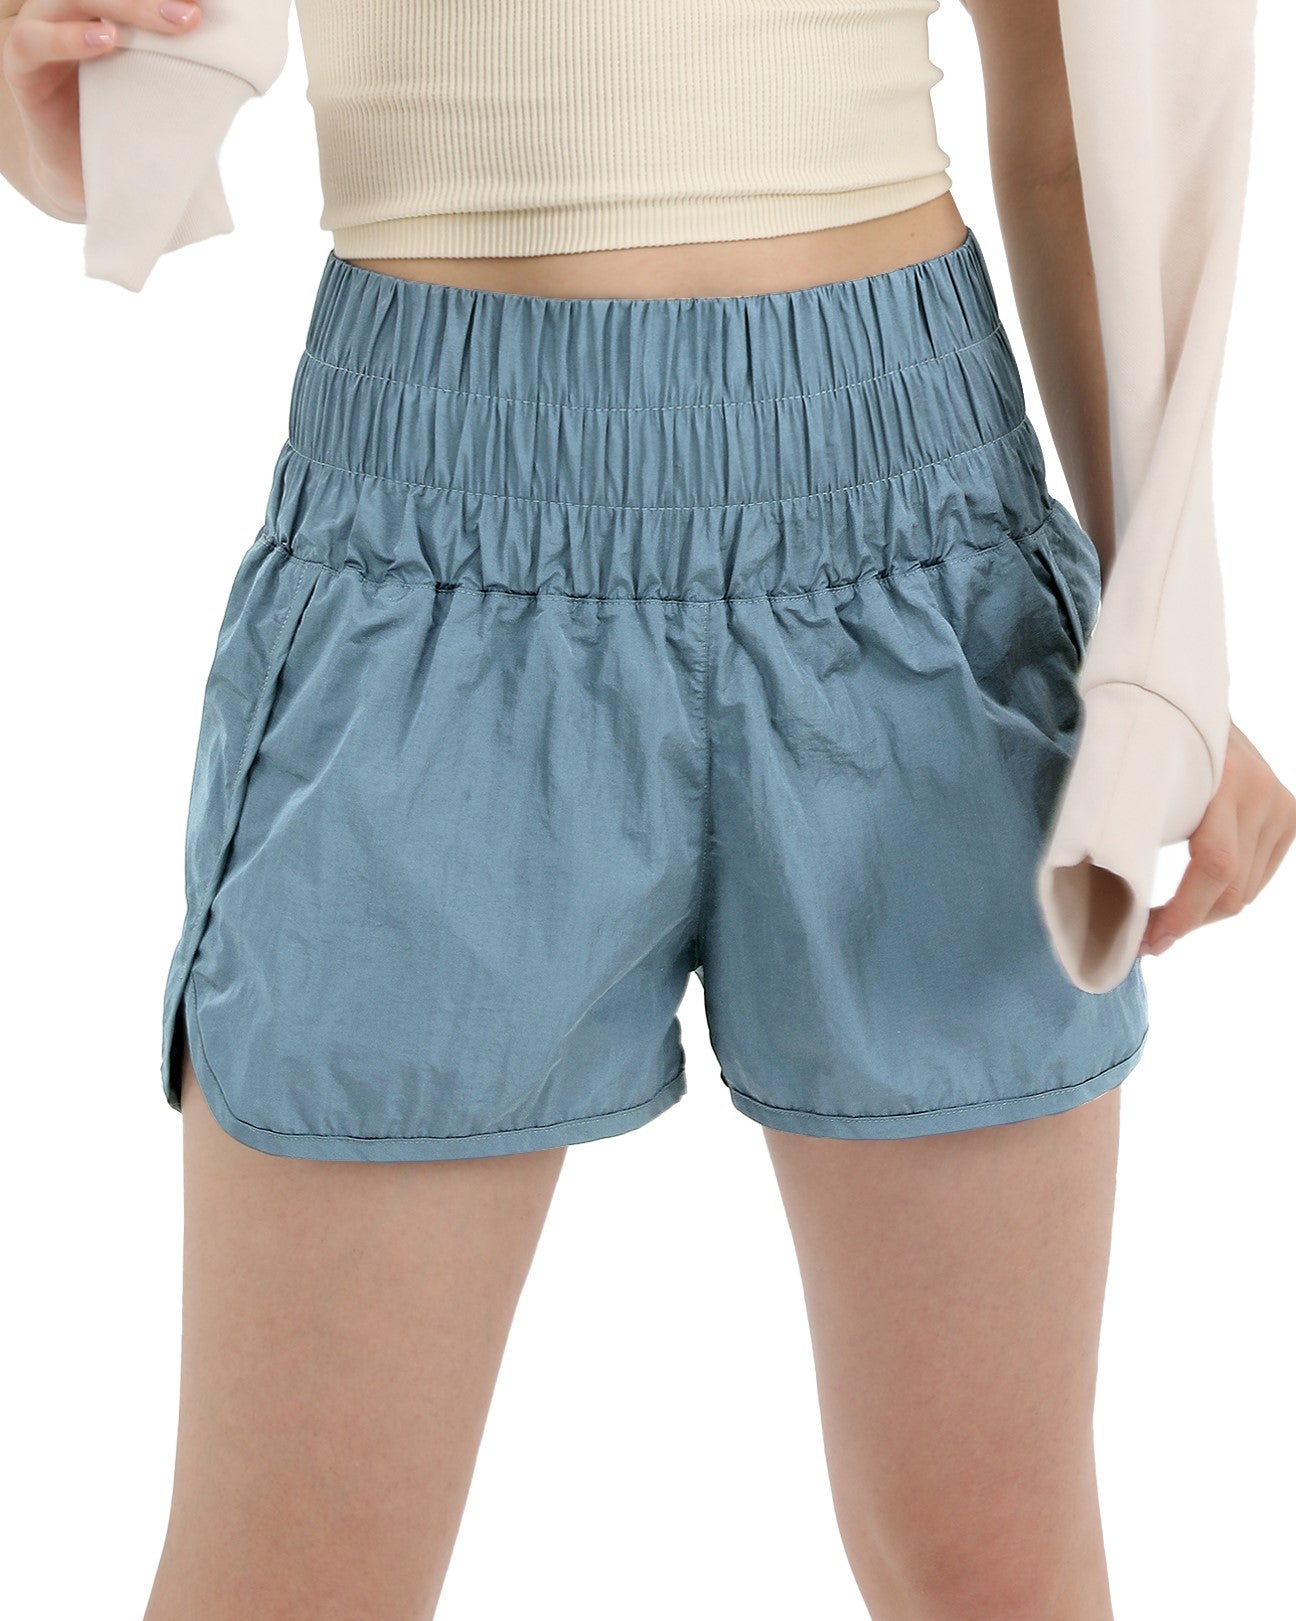 Go to Athletic Shorts-No Liner Blue Spruce - ododos